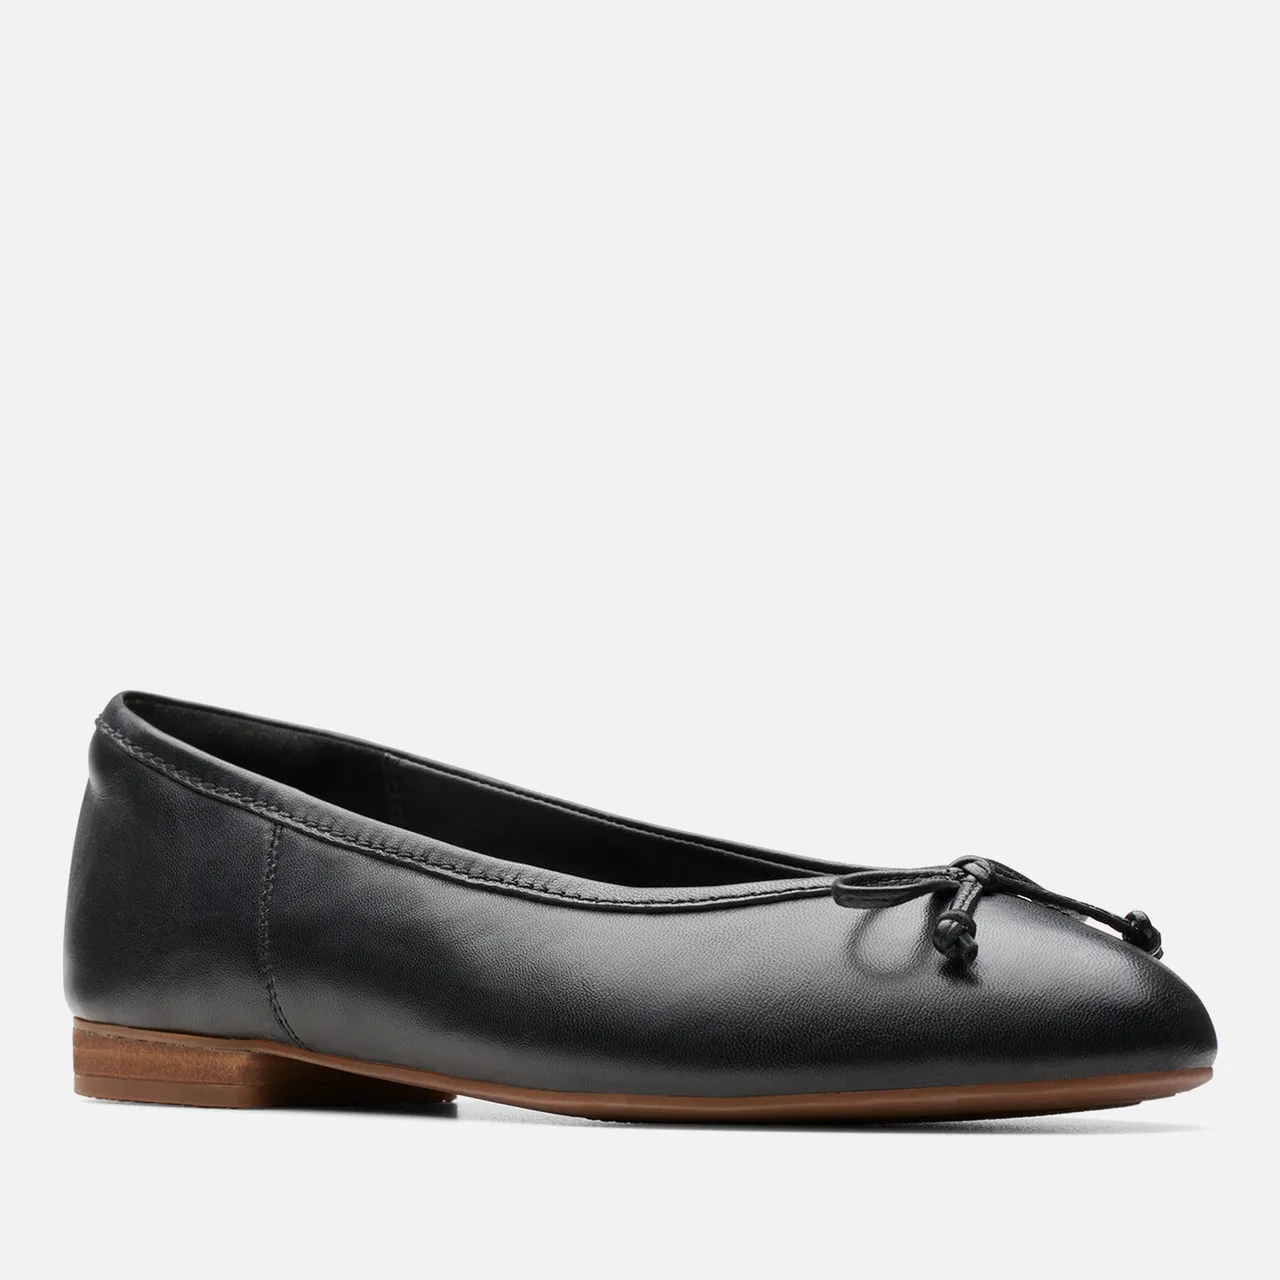 Clarks Women's Fawna Lily Leather Ballet Flats - UK